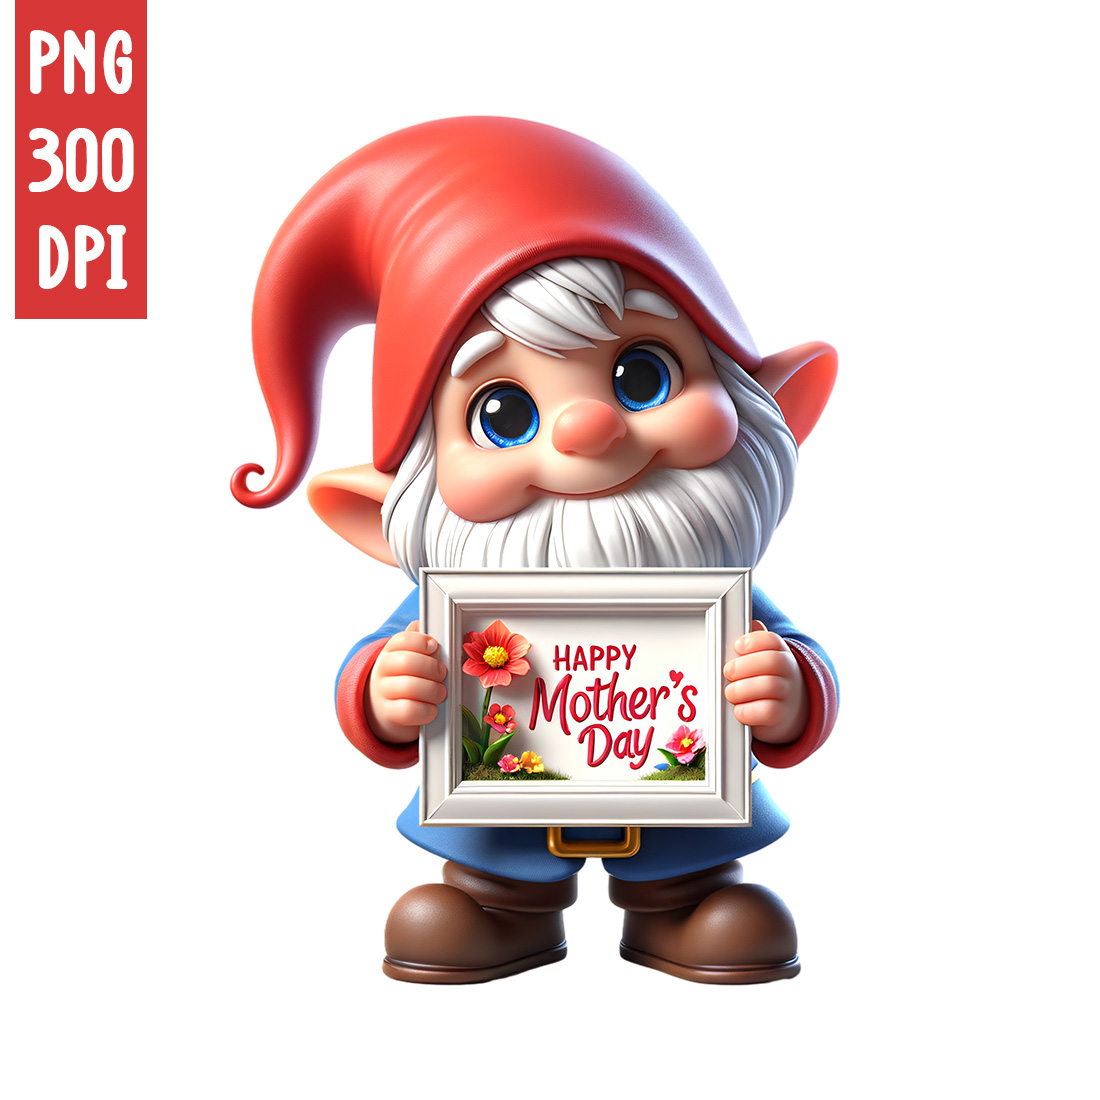 Mother's Day Clipart | Cute Gnome with frame clipart | PNG preview image.